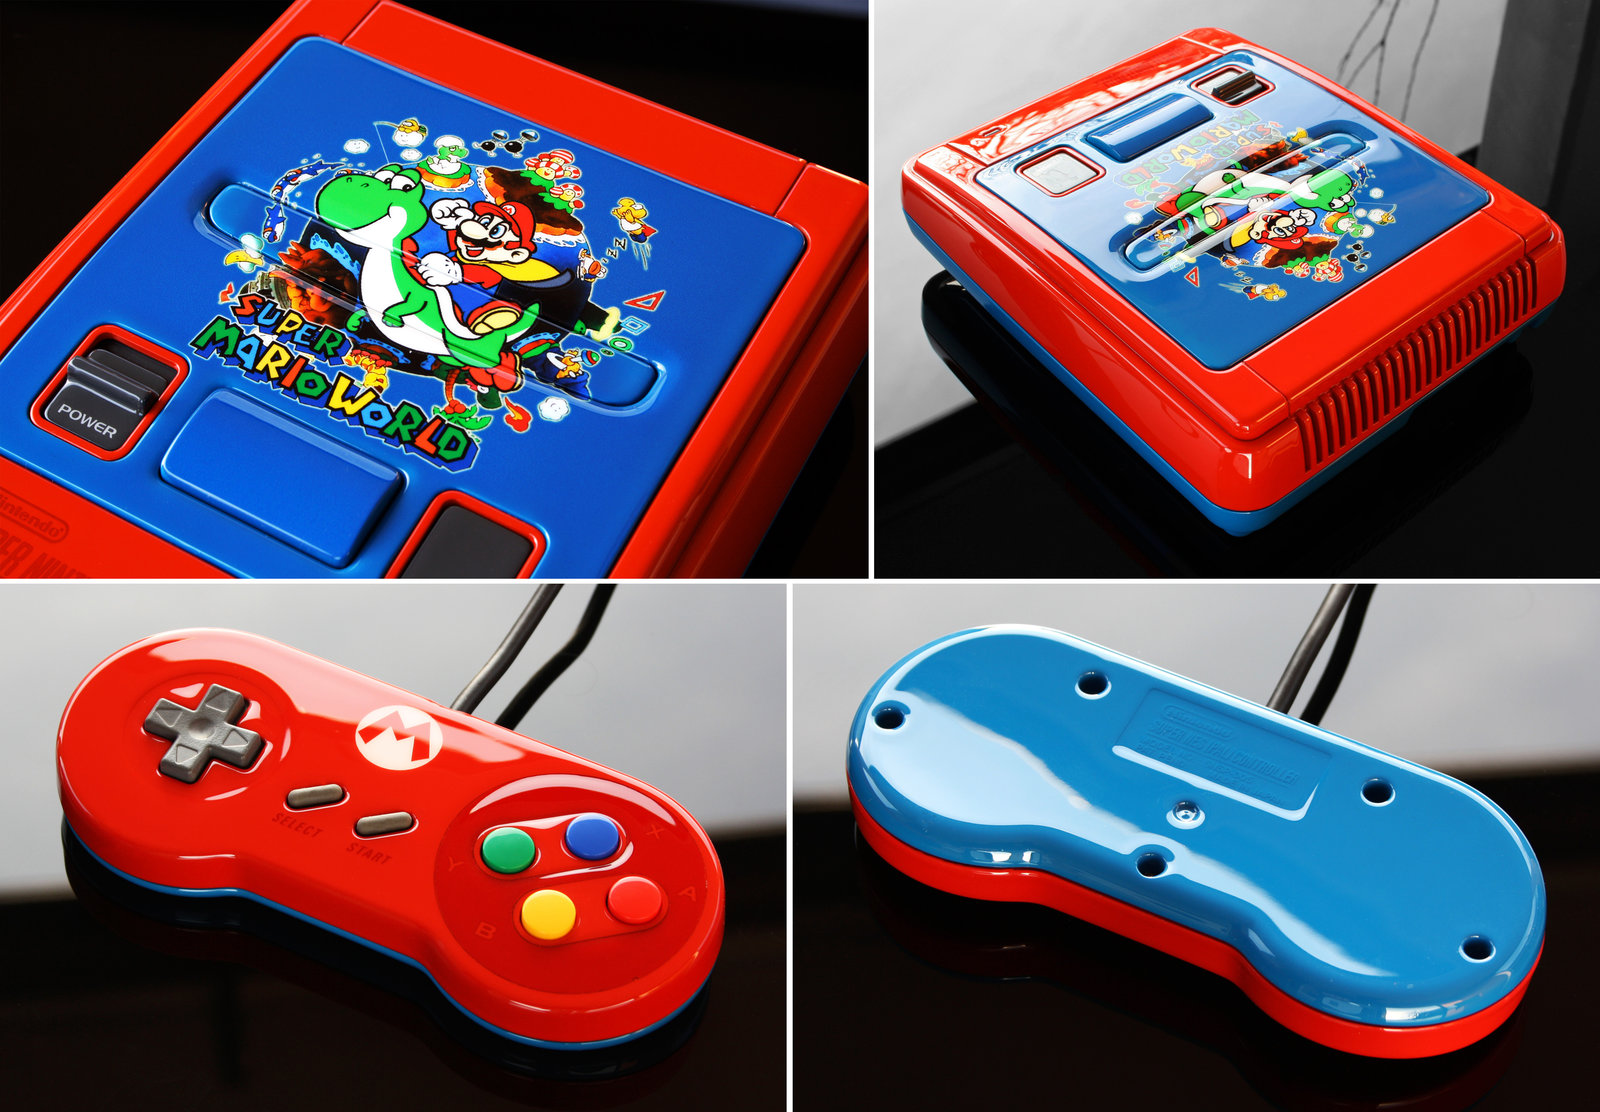 Custom Super Mario World SNES Is A Thing Of Beauty